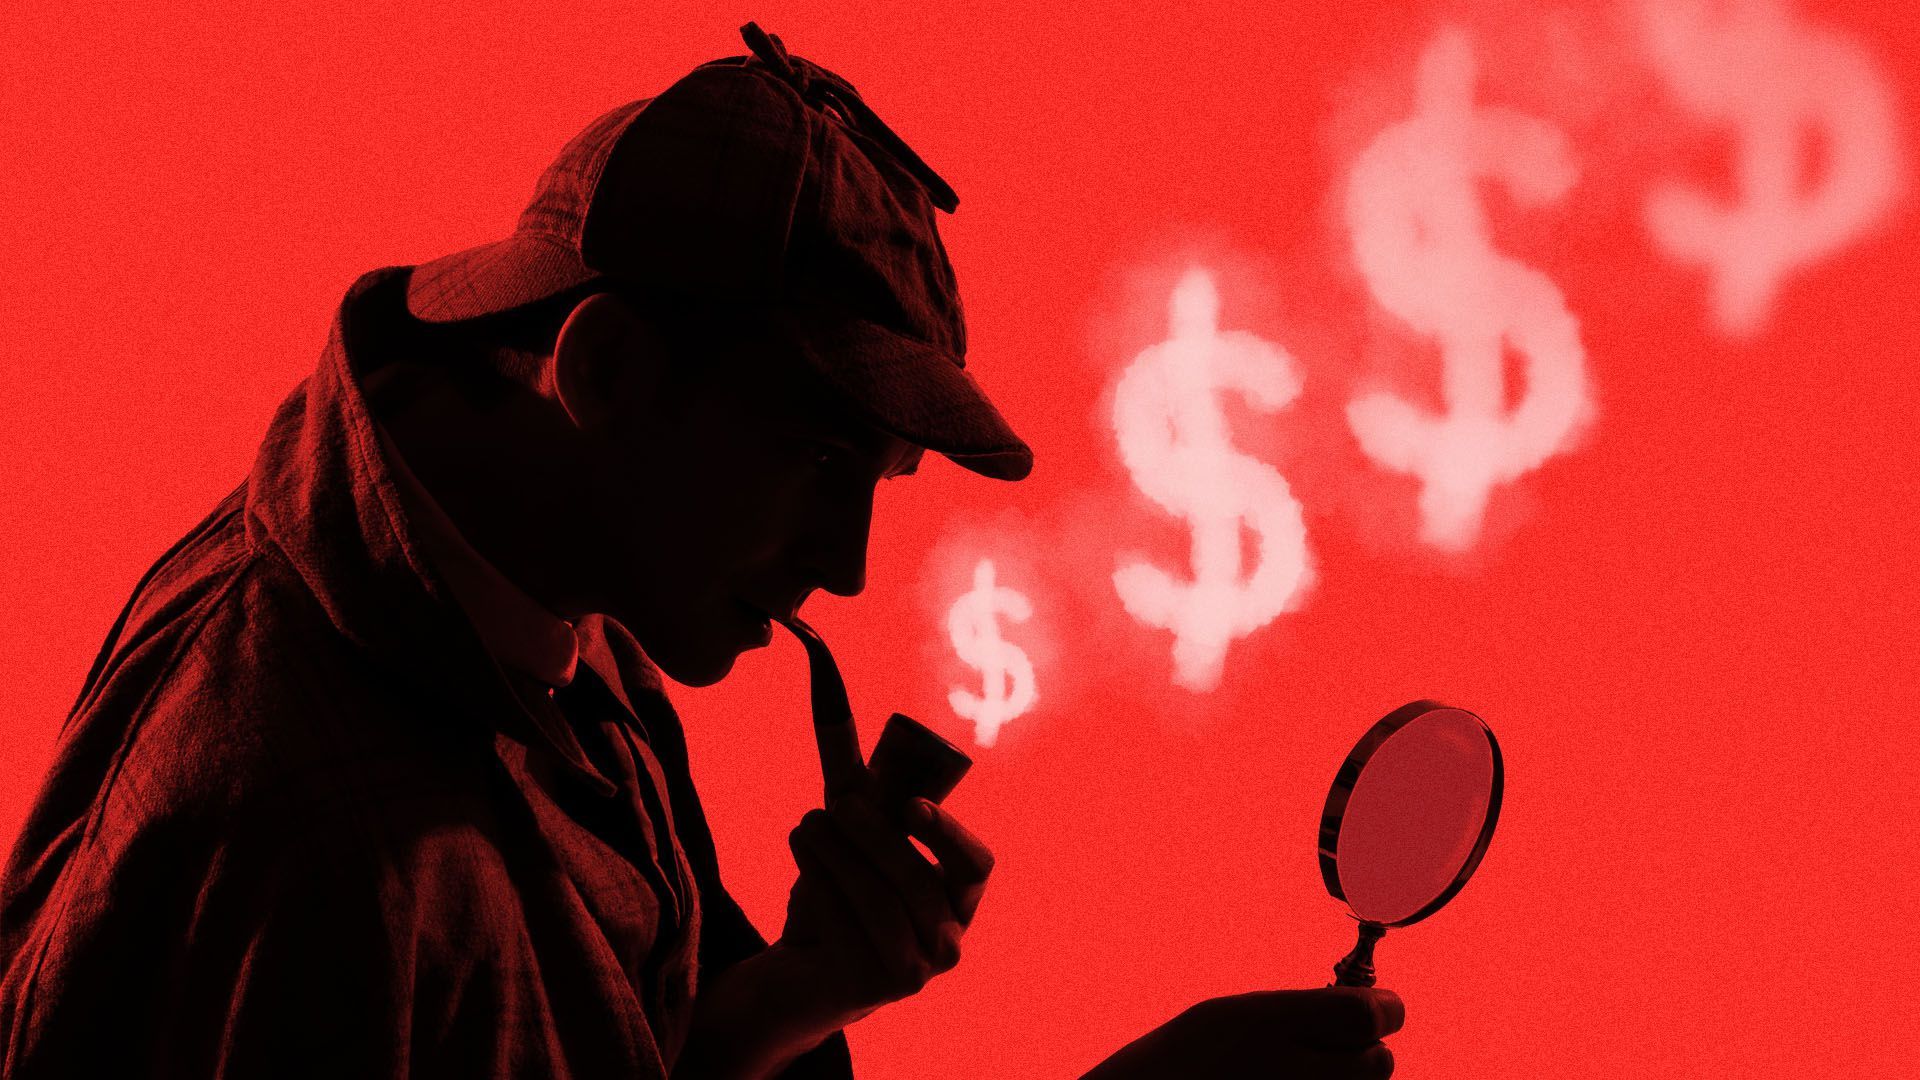 Illustration of a Sherlock Holmes-like figure puffing a pipe with a dollar sign smoke plume